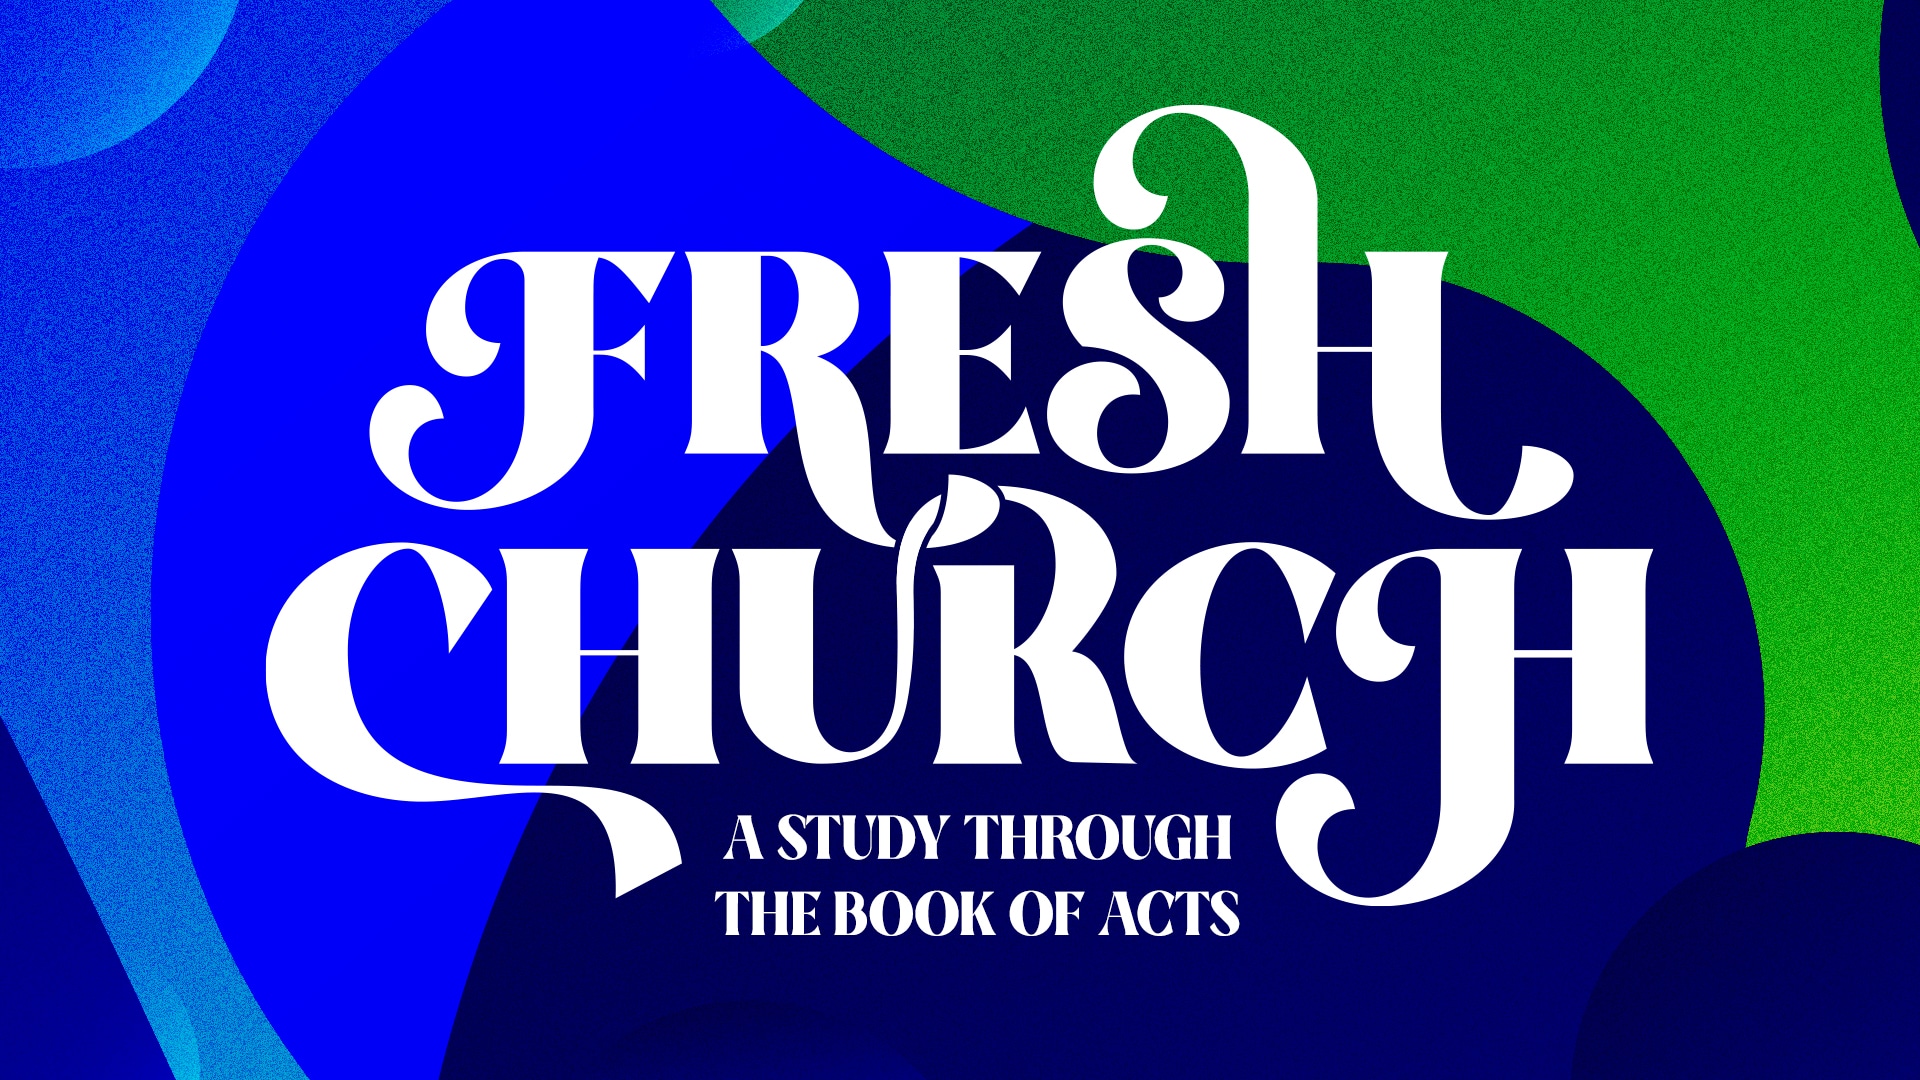 Acts 21: The Leading of the Lord (Fresh Church)